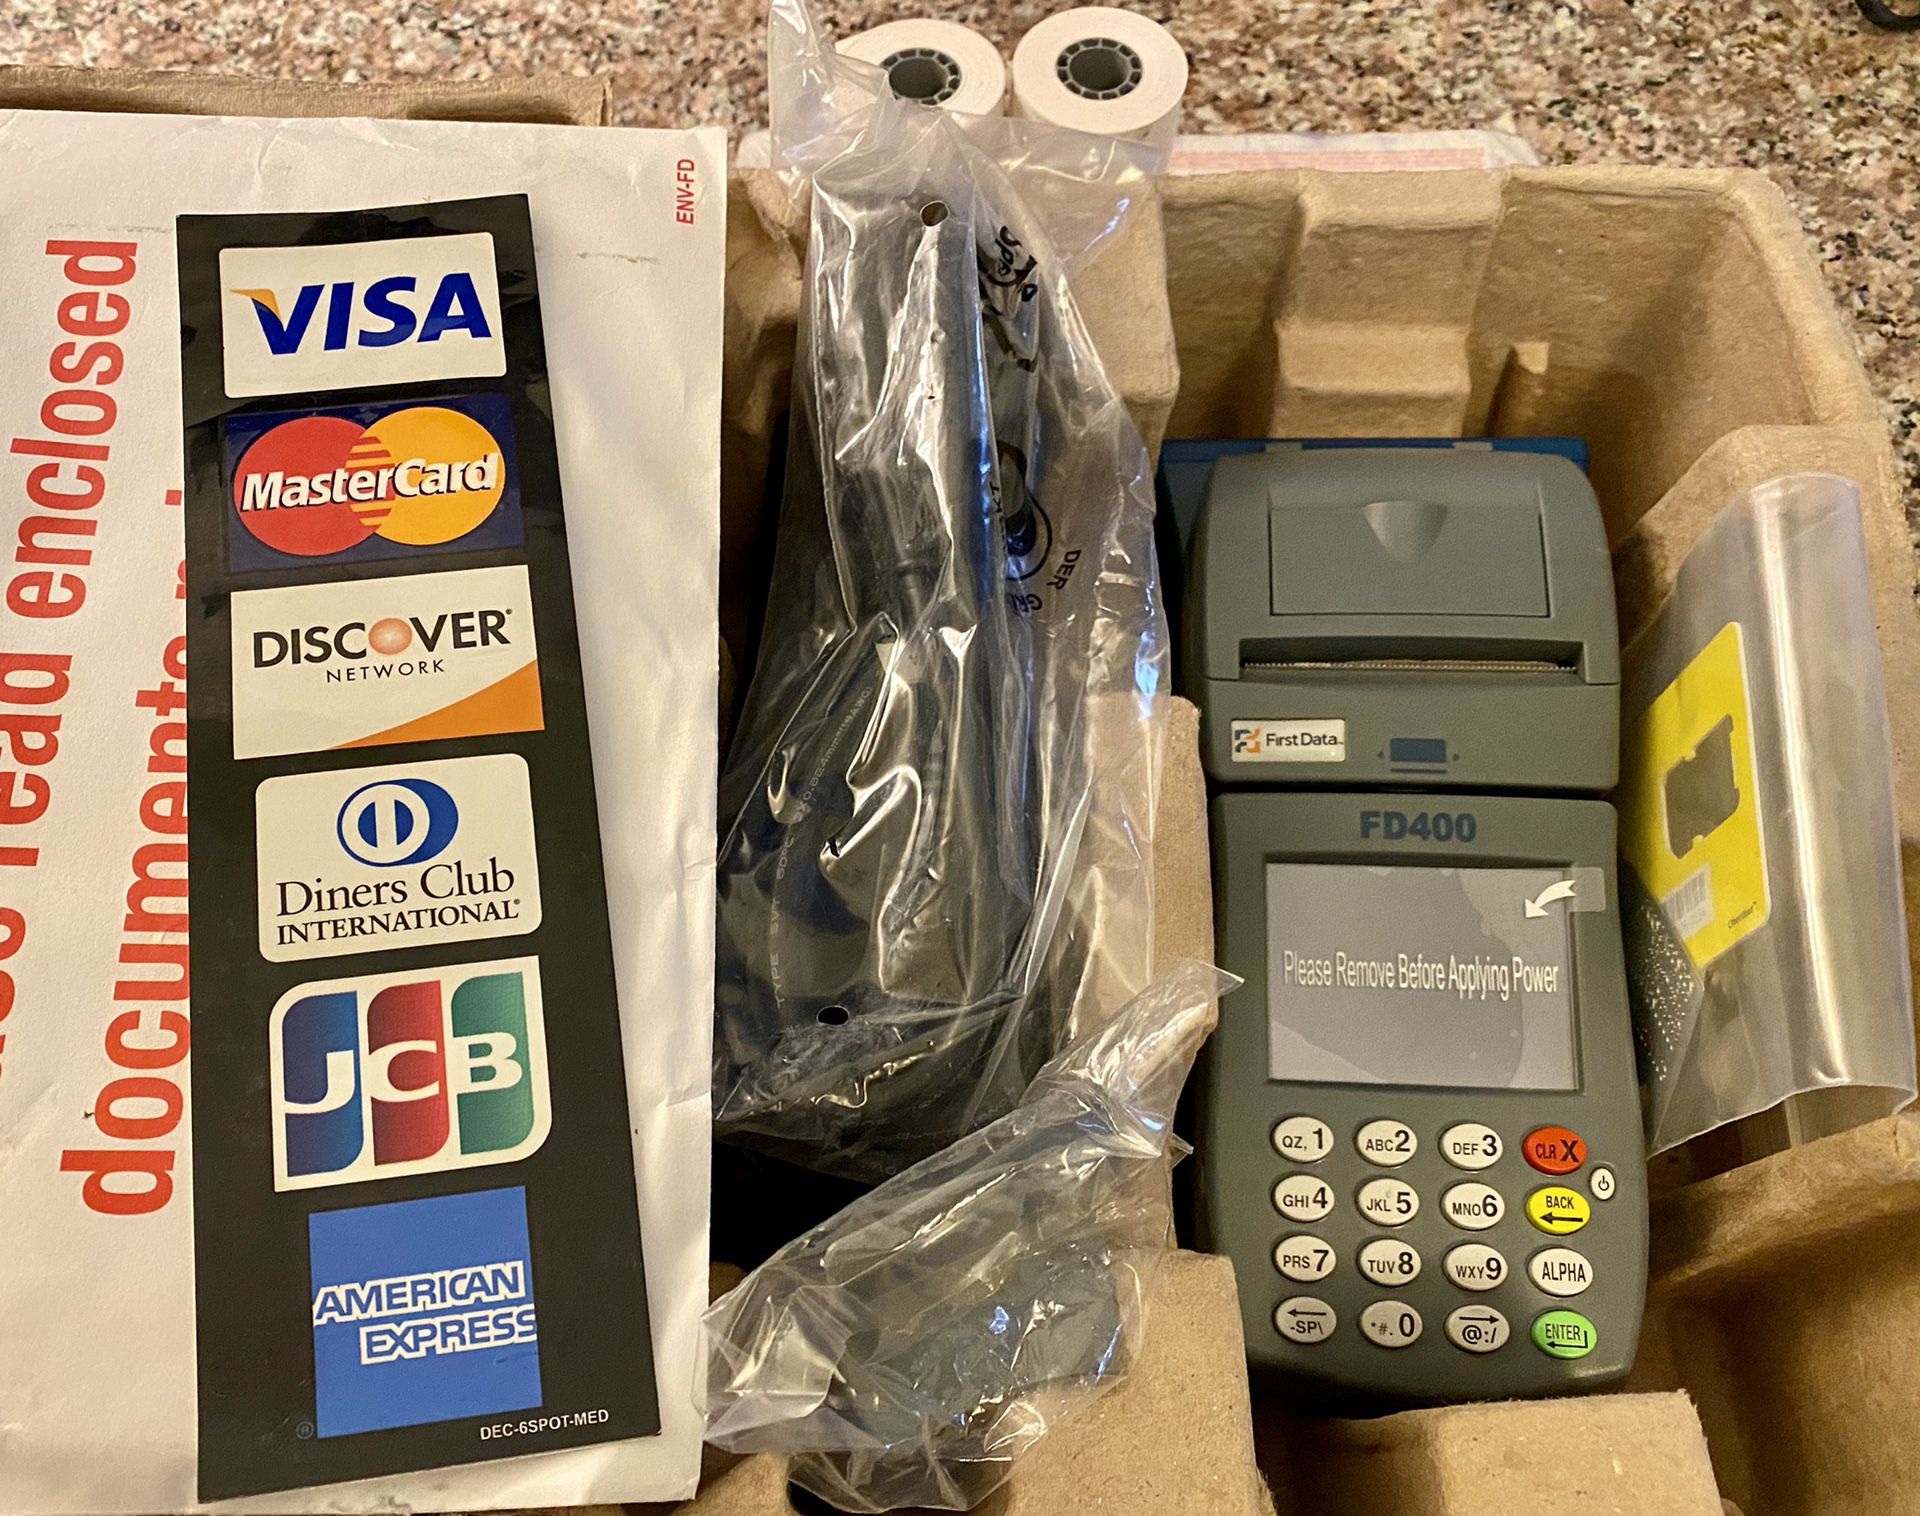 FD400 Wireless (Portable) Credit/Debit Card Terminal - Brand New (out of box)